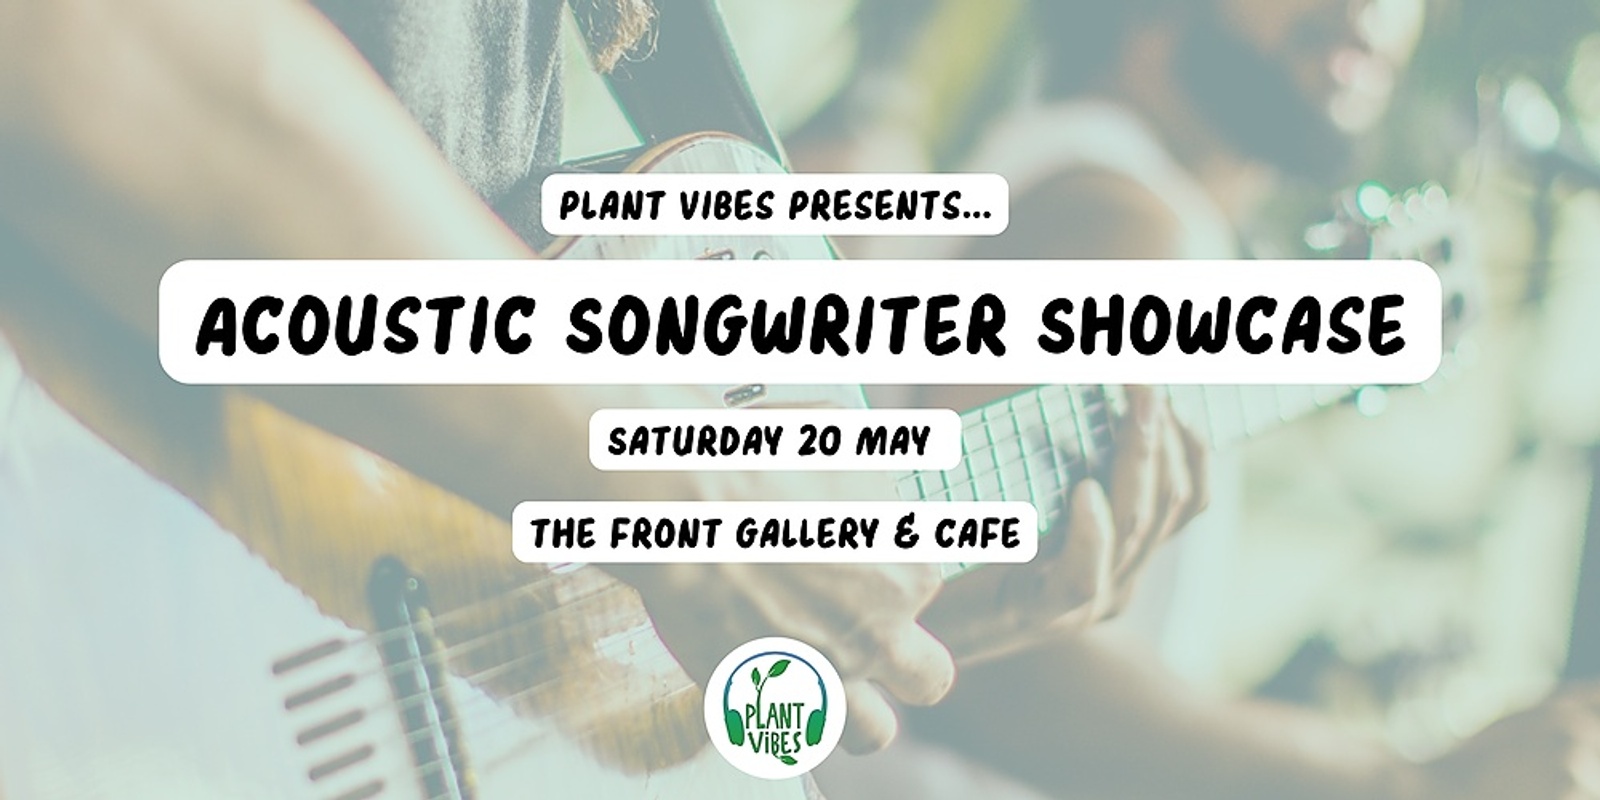 Banner image for Plant Vibes Presents Acoustic Songwriter Showcase at The Front